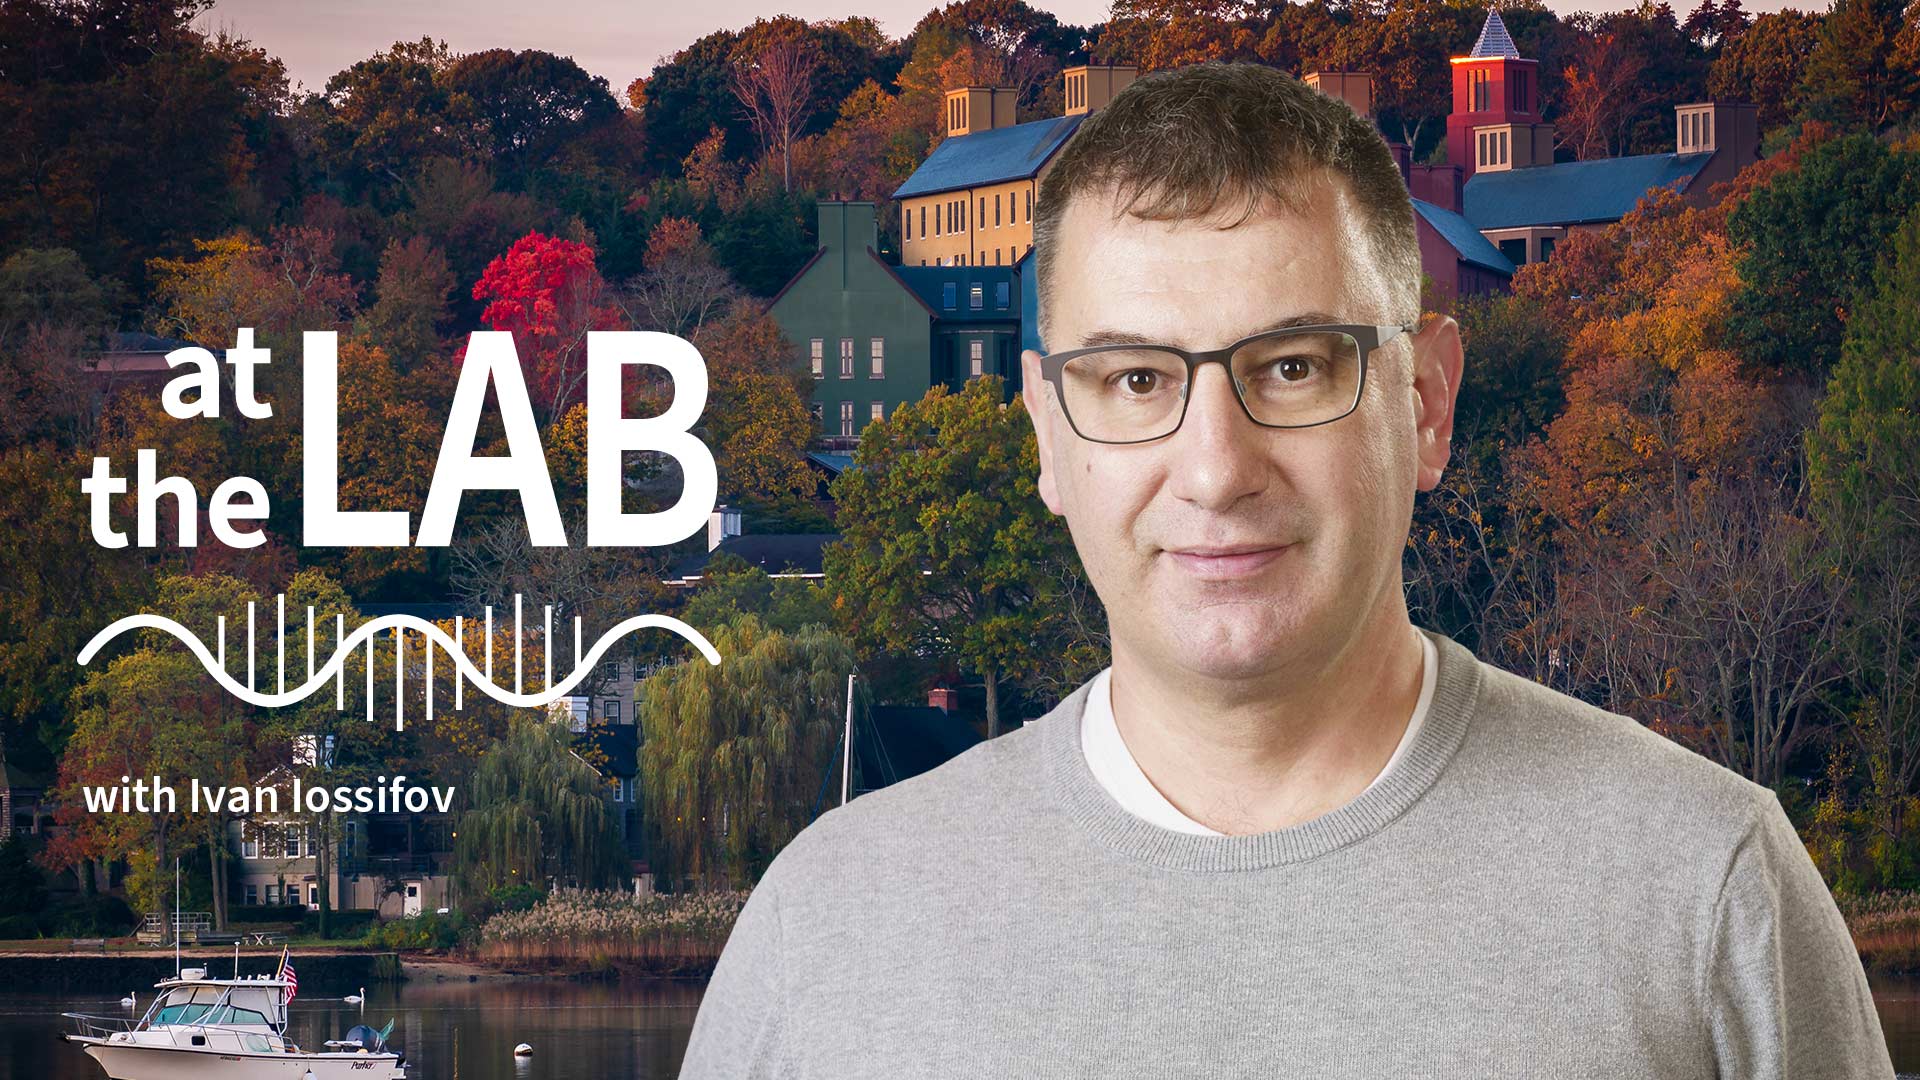 image of Cold Spring Harbor campus from across the harbor with At the Lab podcast logo and portrait of Ivan Iossifov